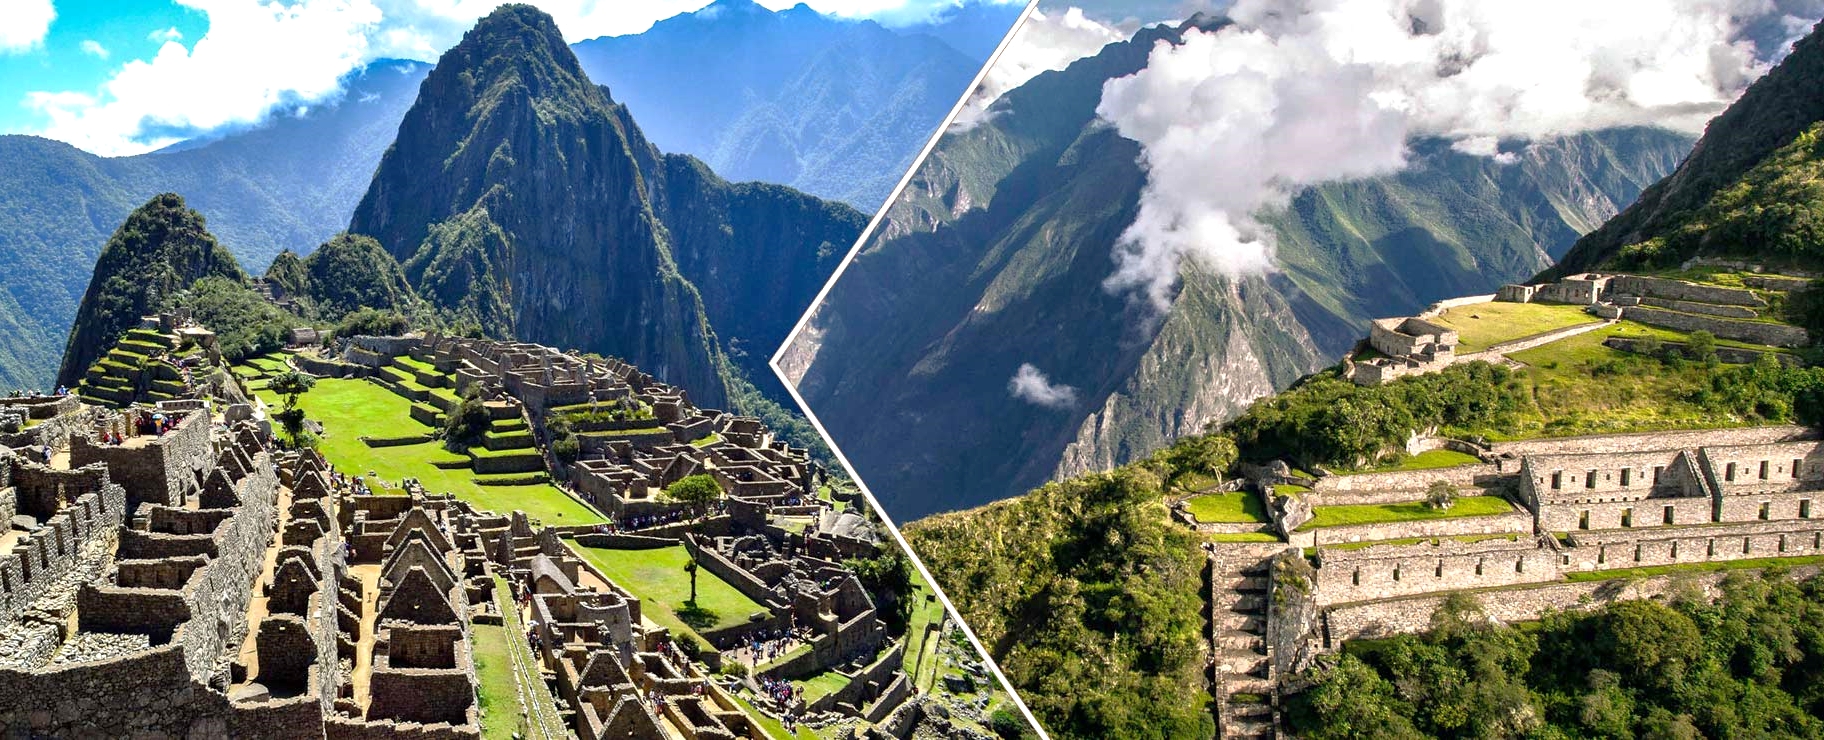 Which is the best option: Machu Picchu or Choquequirao?